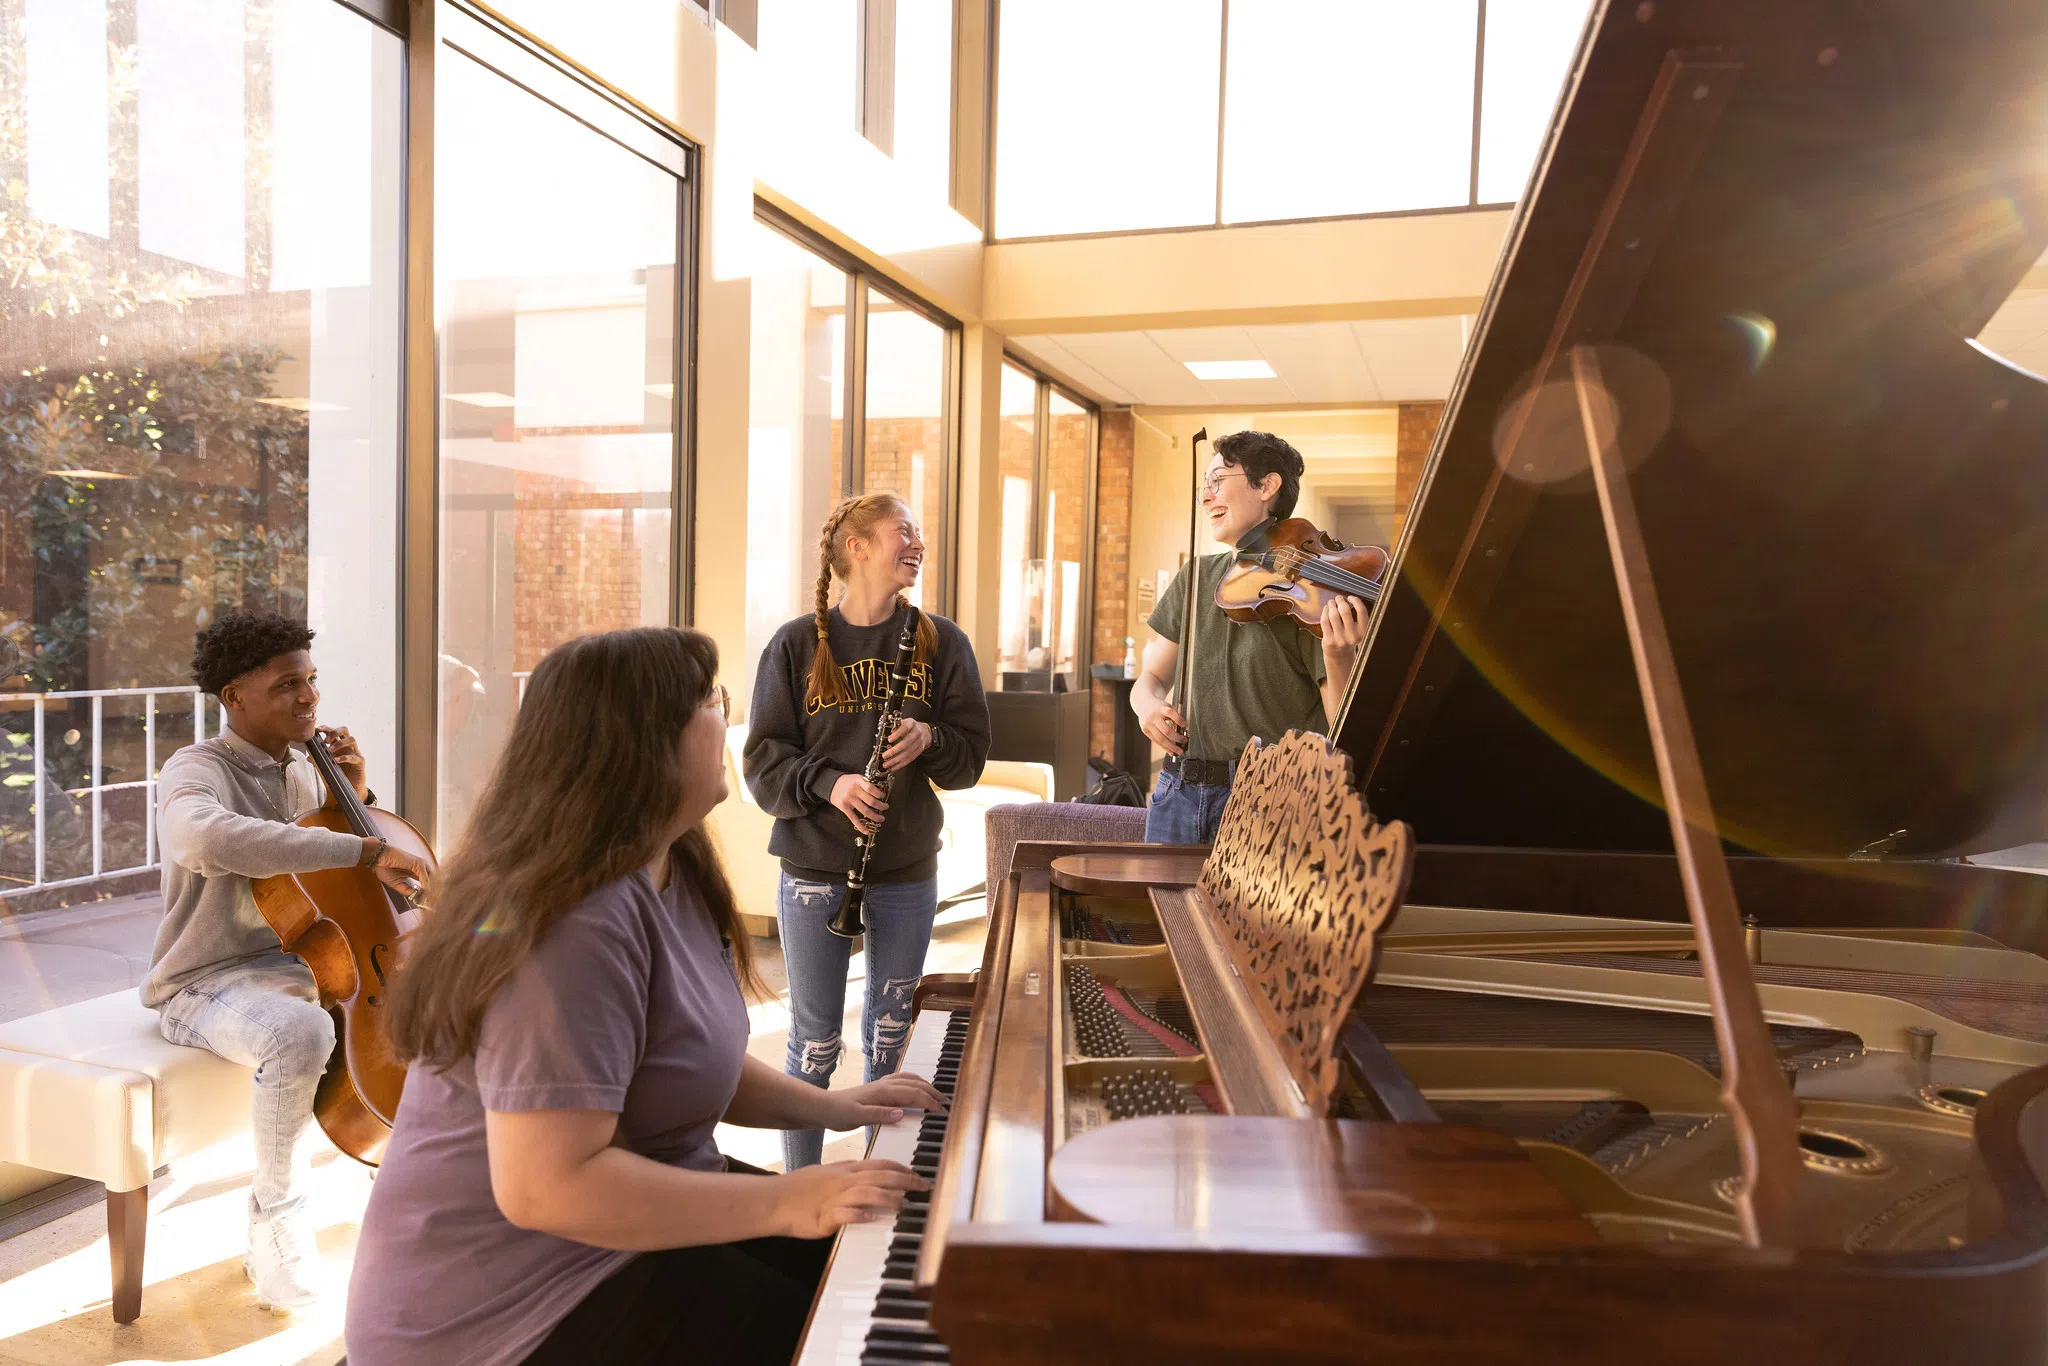 Students gather around a piano with various instruments in a sunny, window-filled room.